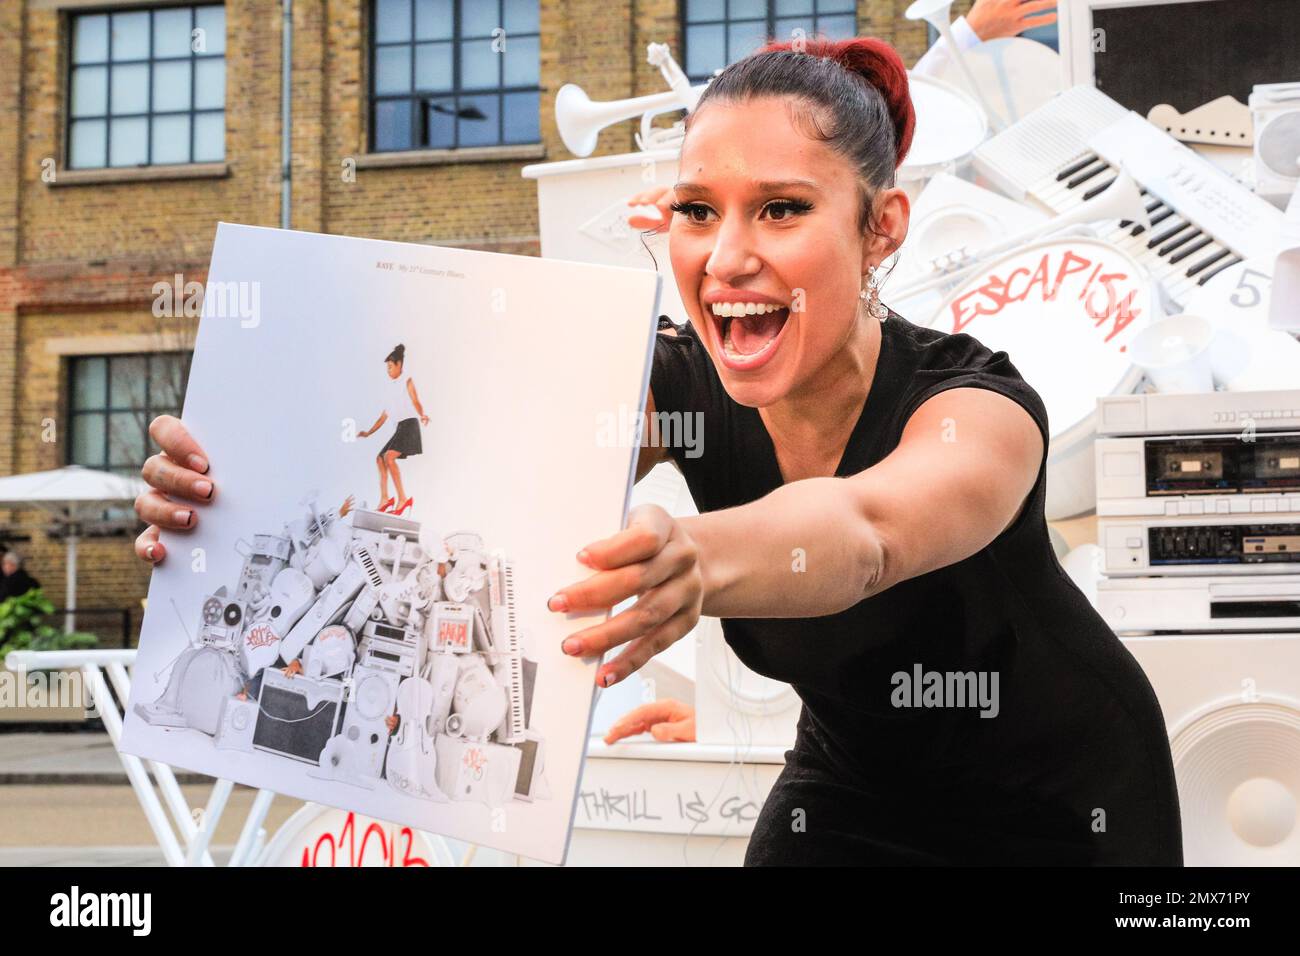 London, UK. 02nd Feb, 2023. Fresh from her recent UK No.1 single, singer Raye (RAYE), short for Rachel Agatha Keen, smiles and poses with an installation of her latest album cover at Kings Cross station, to coincide with the release of the new album, 'My 21st Century Blues'. Copyright: Imageplotter/Alamy Live News Stock Photo